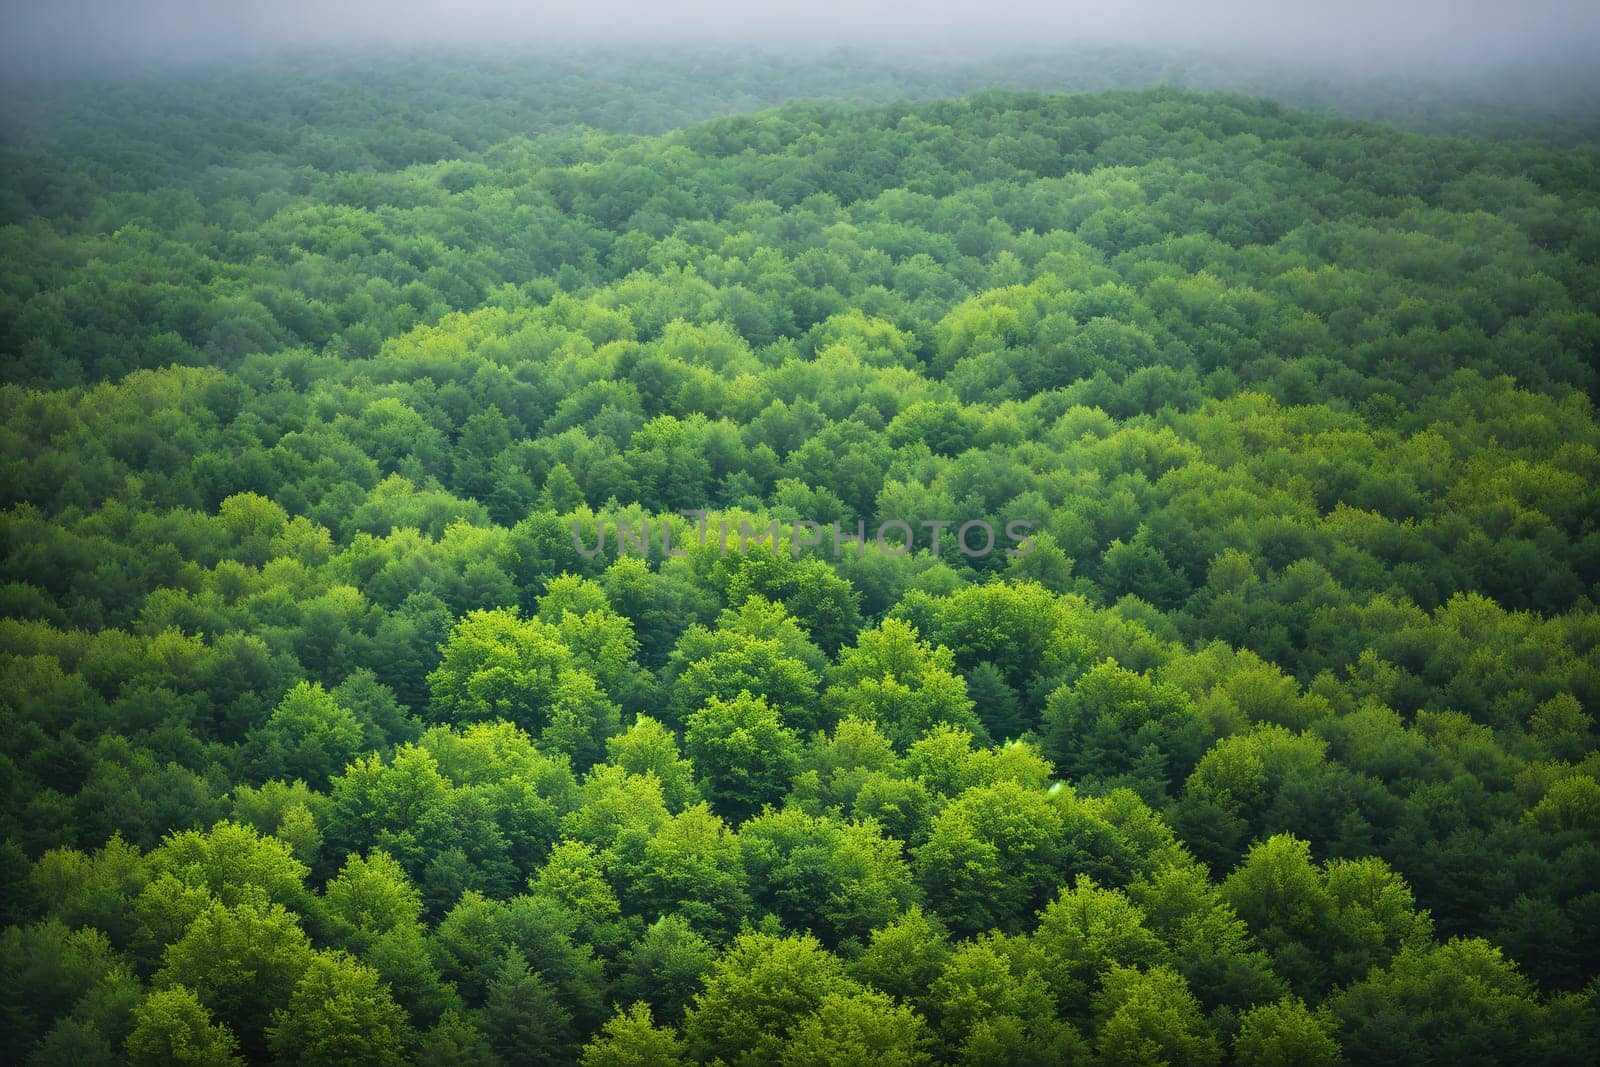 The image is a green forest with trees and fog in the background.